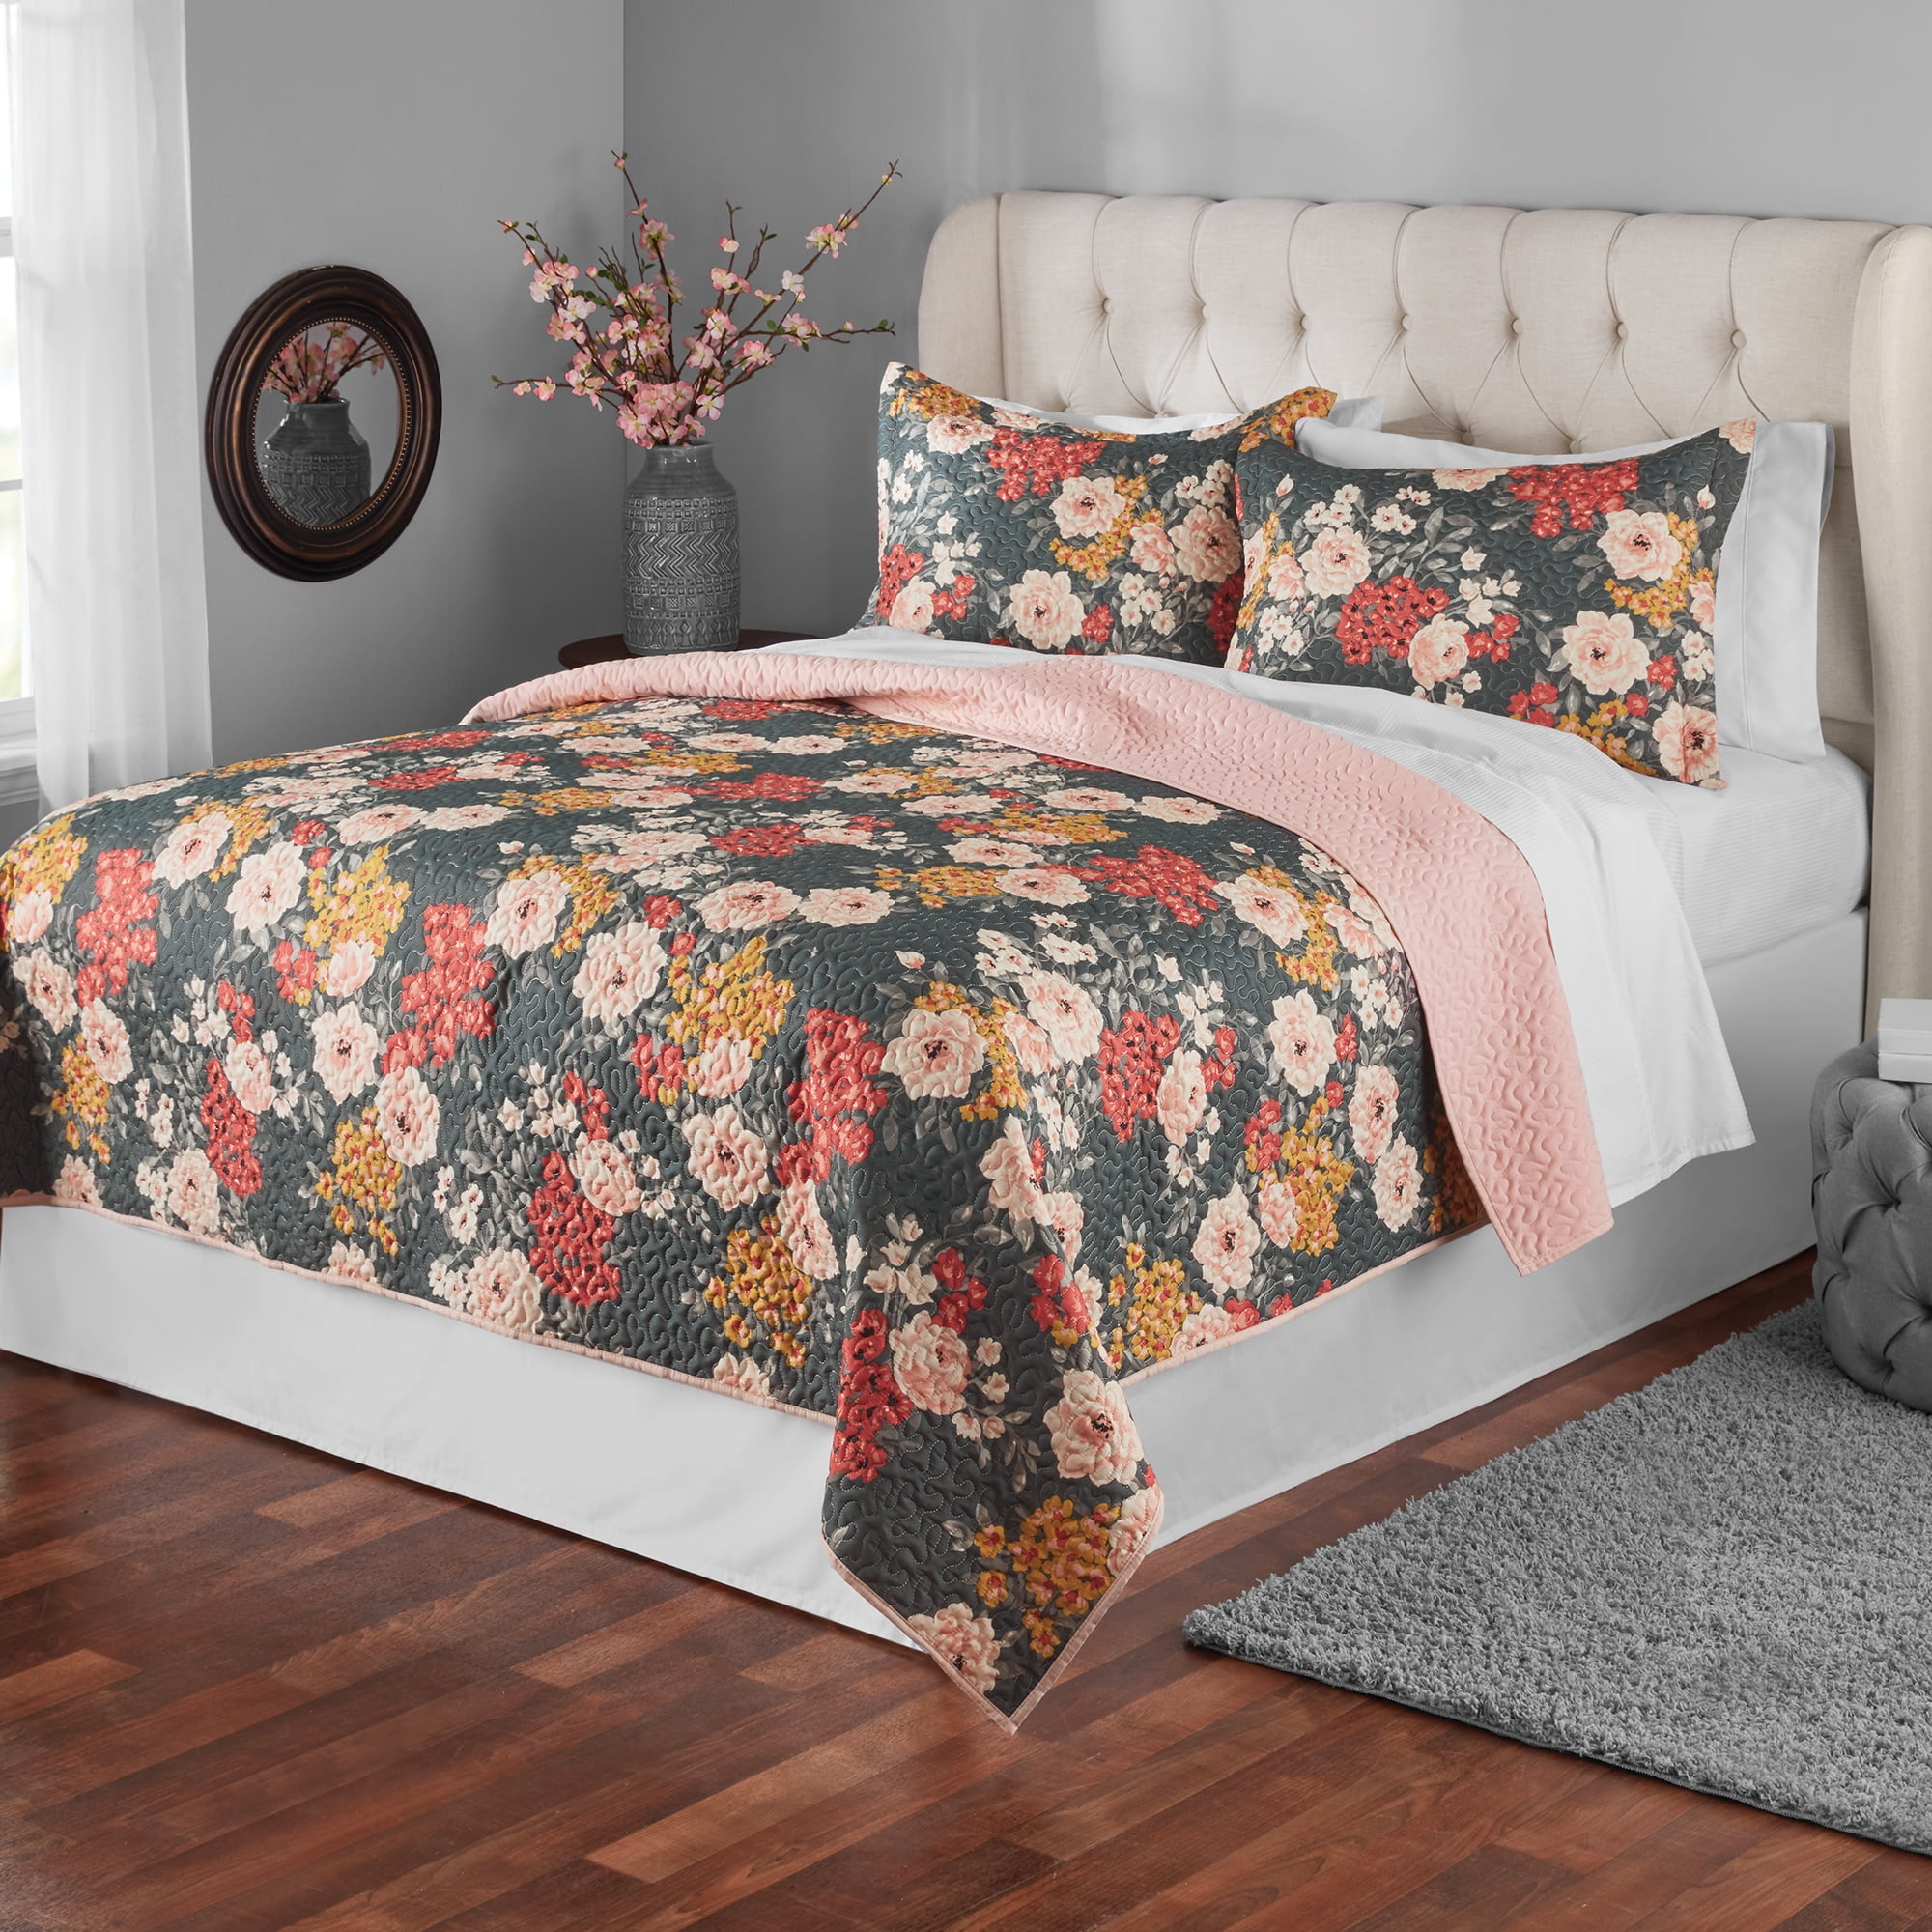 Bethany Sophisticated Floral 3 Pc Quilt Set-Quilt 2 Shams-Reversible Comforter 